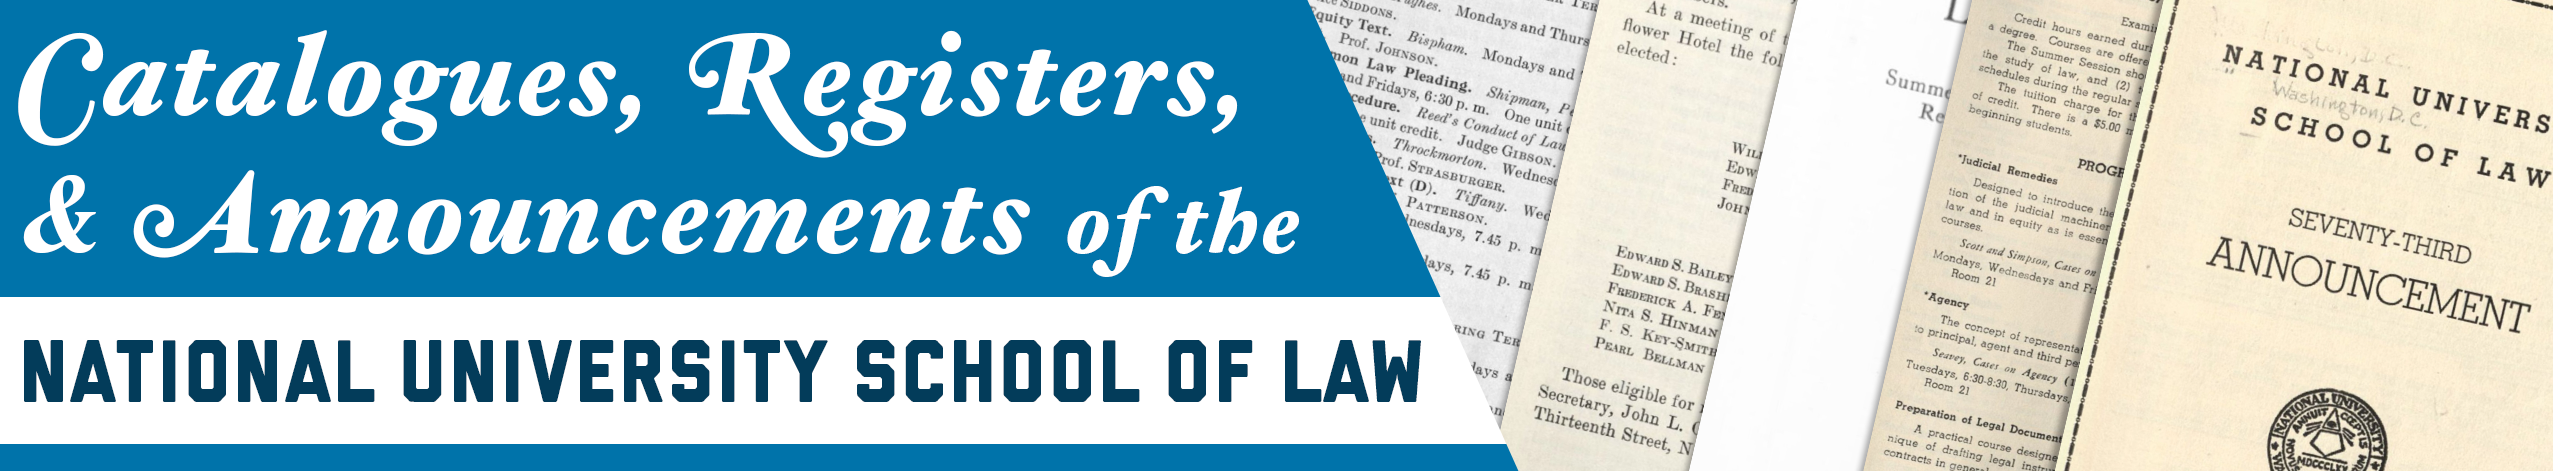 Catalogues, Registers, and Announcements of the National University School of Law